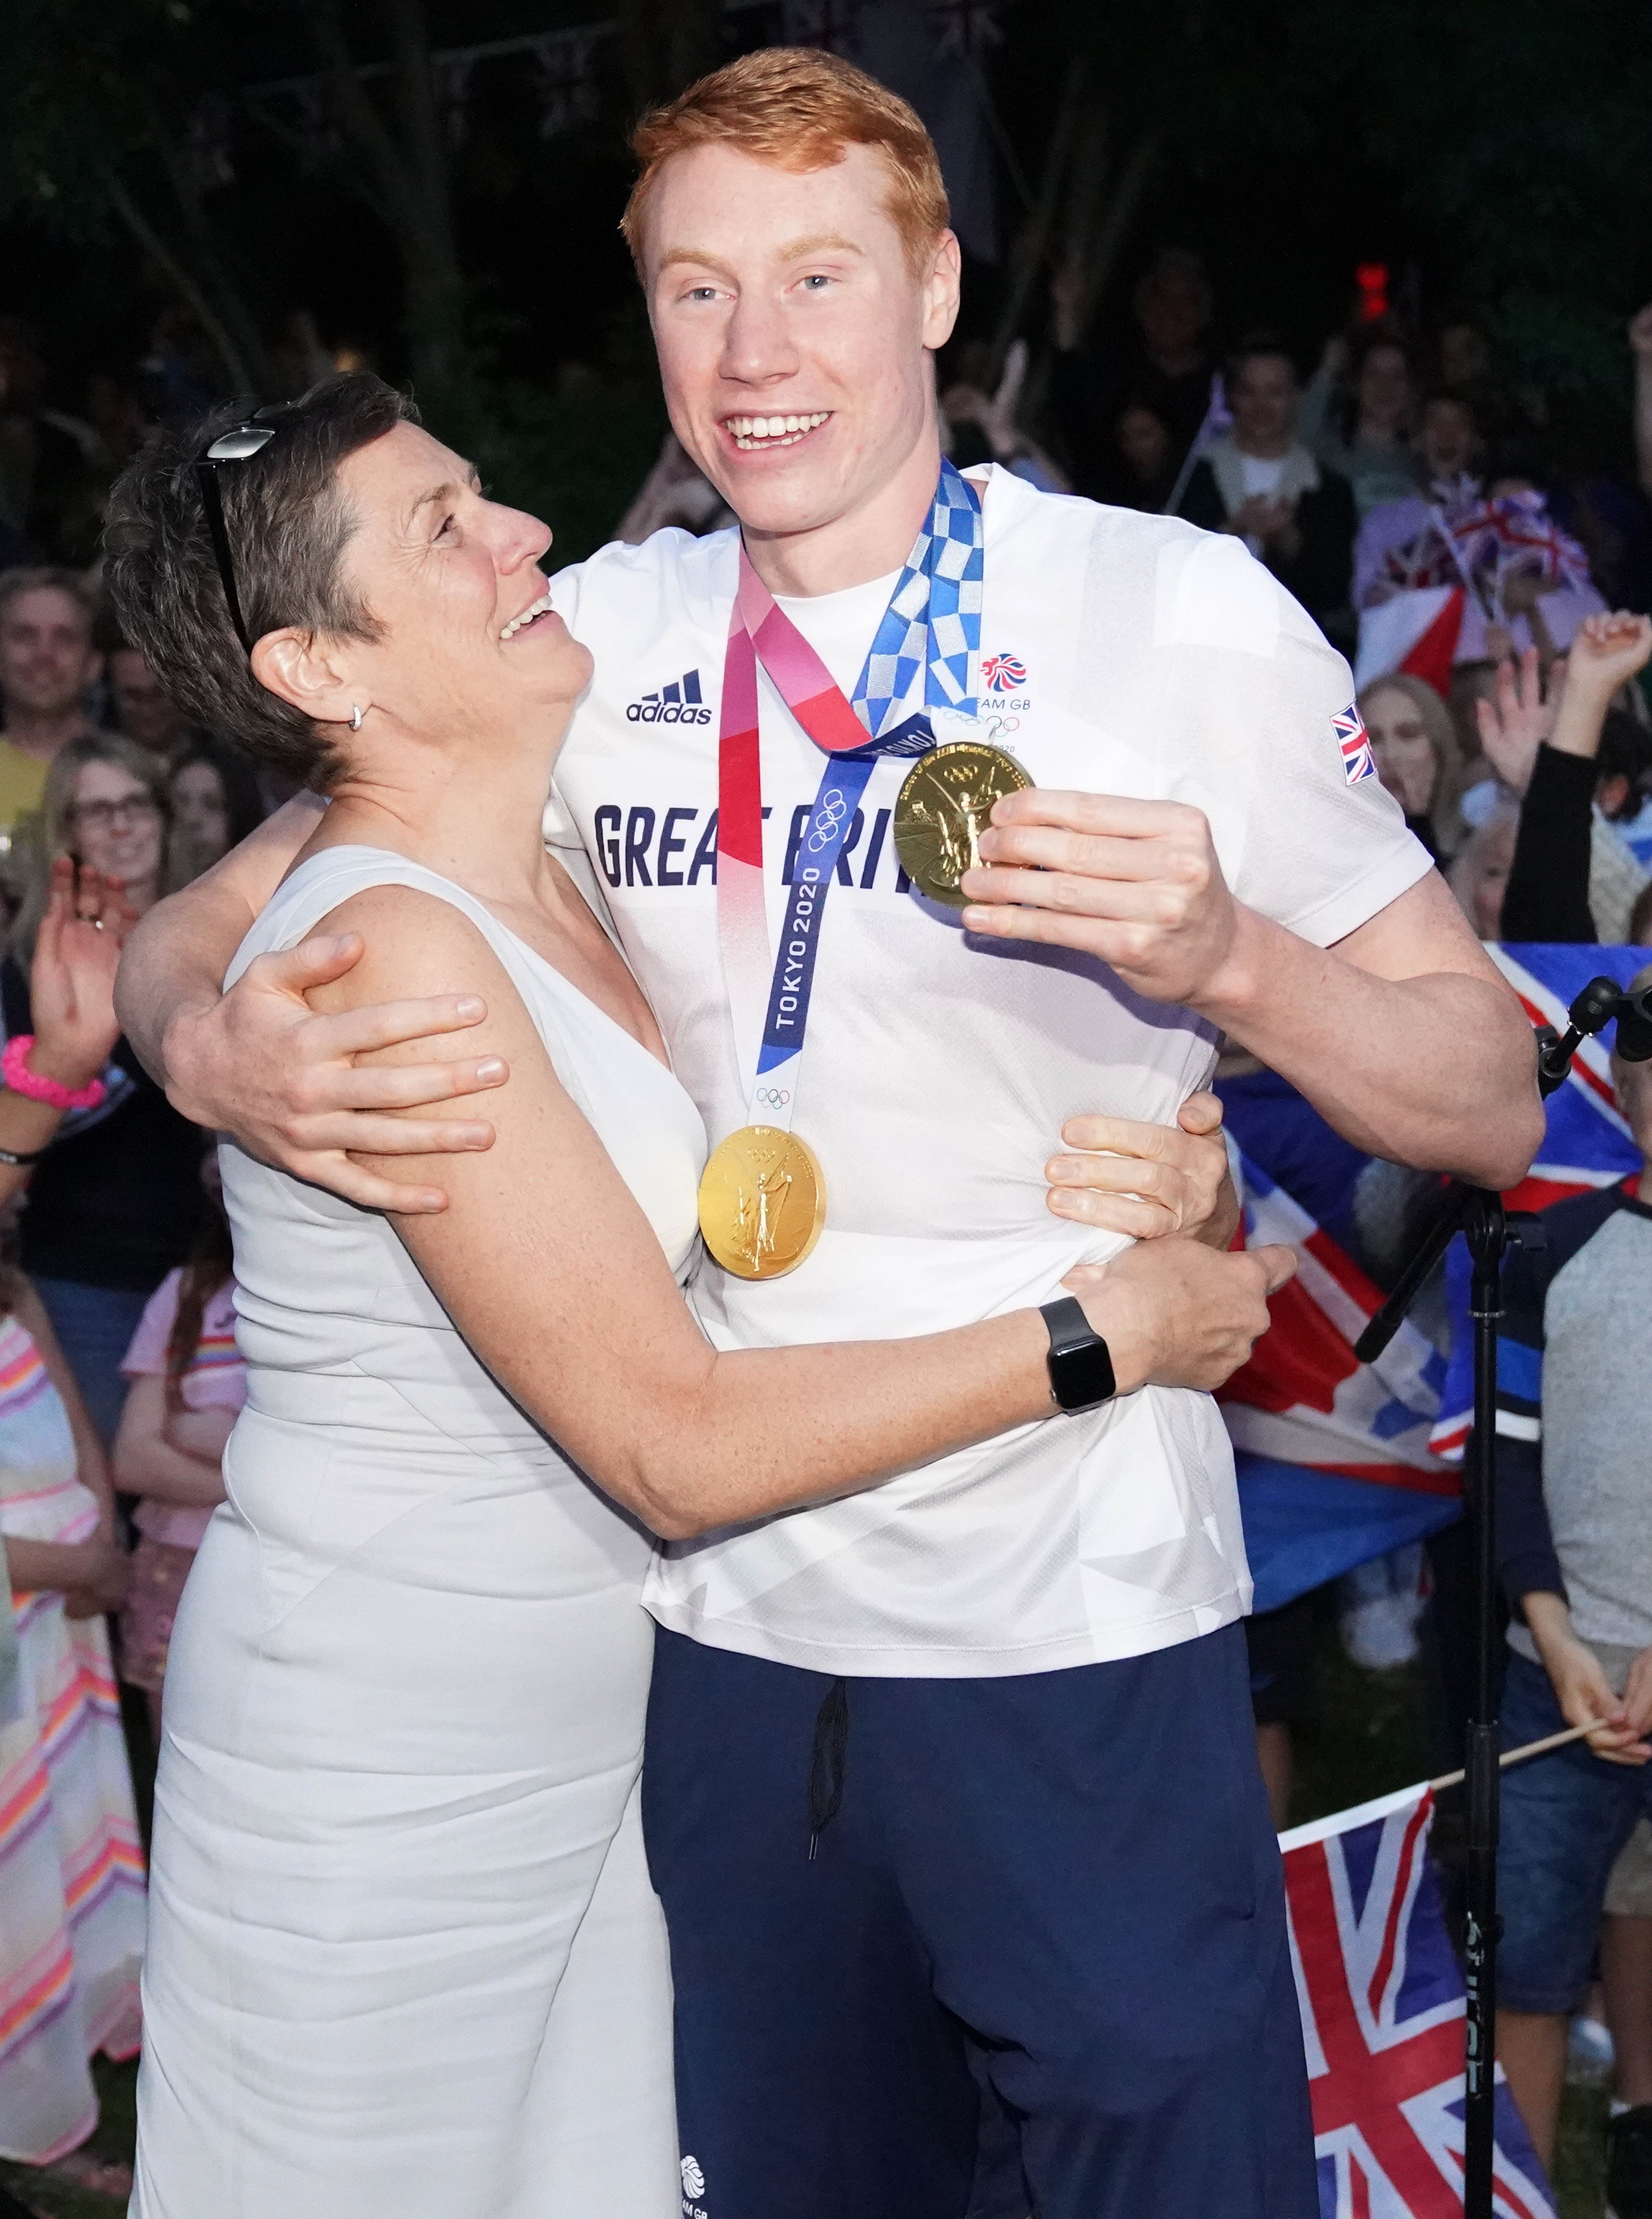 Dean pictured with his mum Jacquie Hughes at a welcome home event after the Olympics last summer (Jonathan Brady/PA)